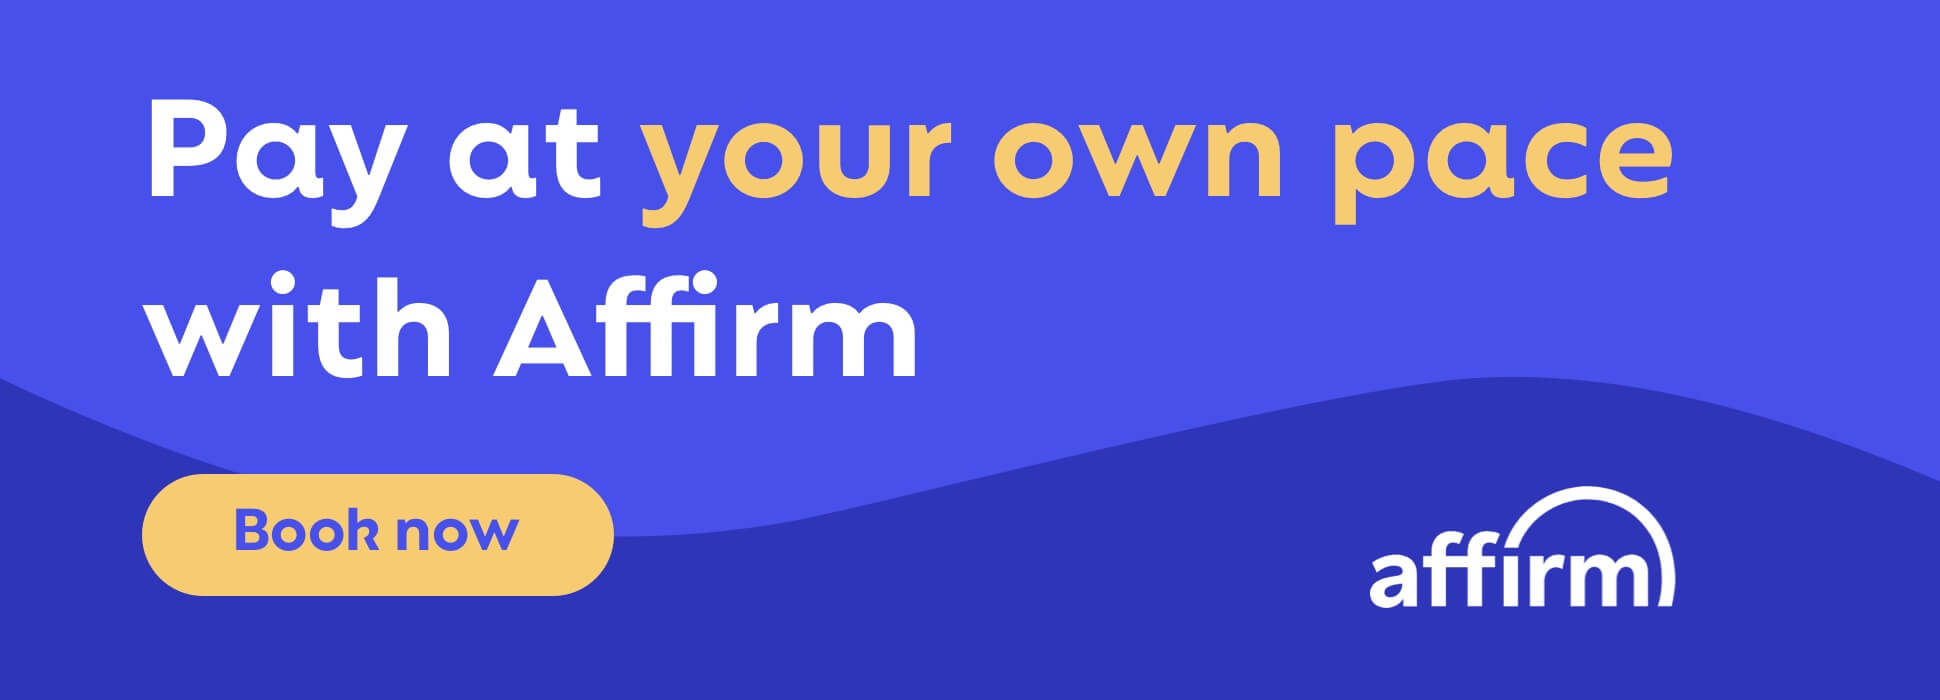 Pay at your own pace with Affirm Booh affirm 